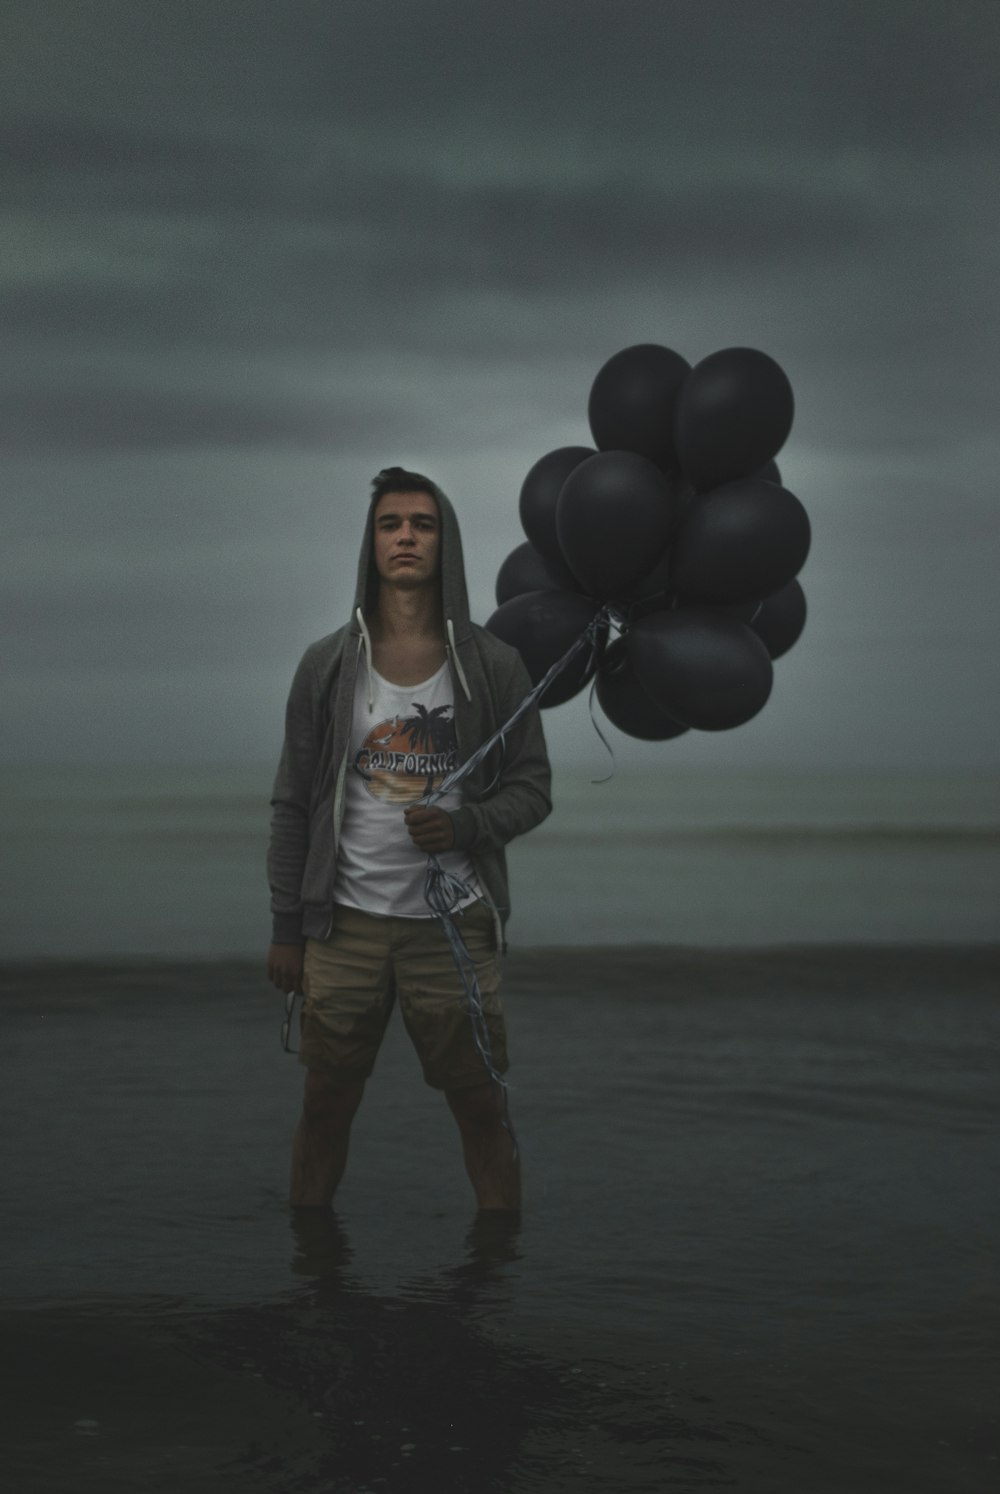 man holding balloons while on water